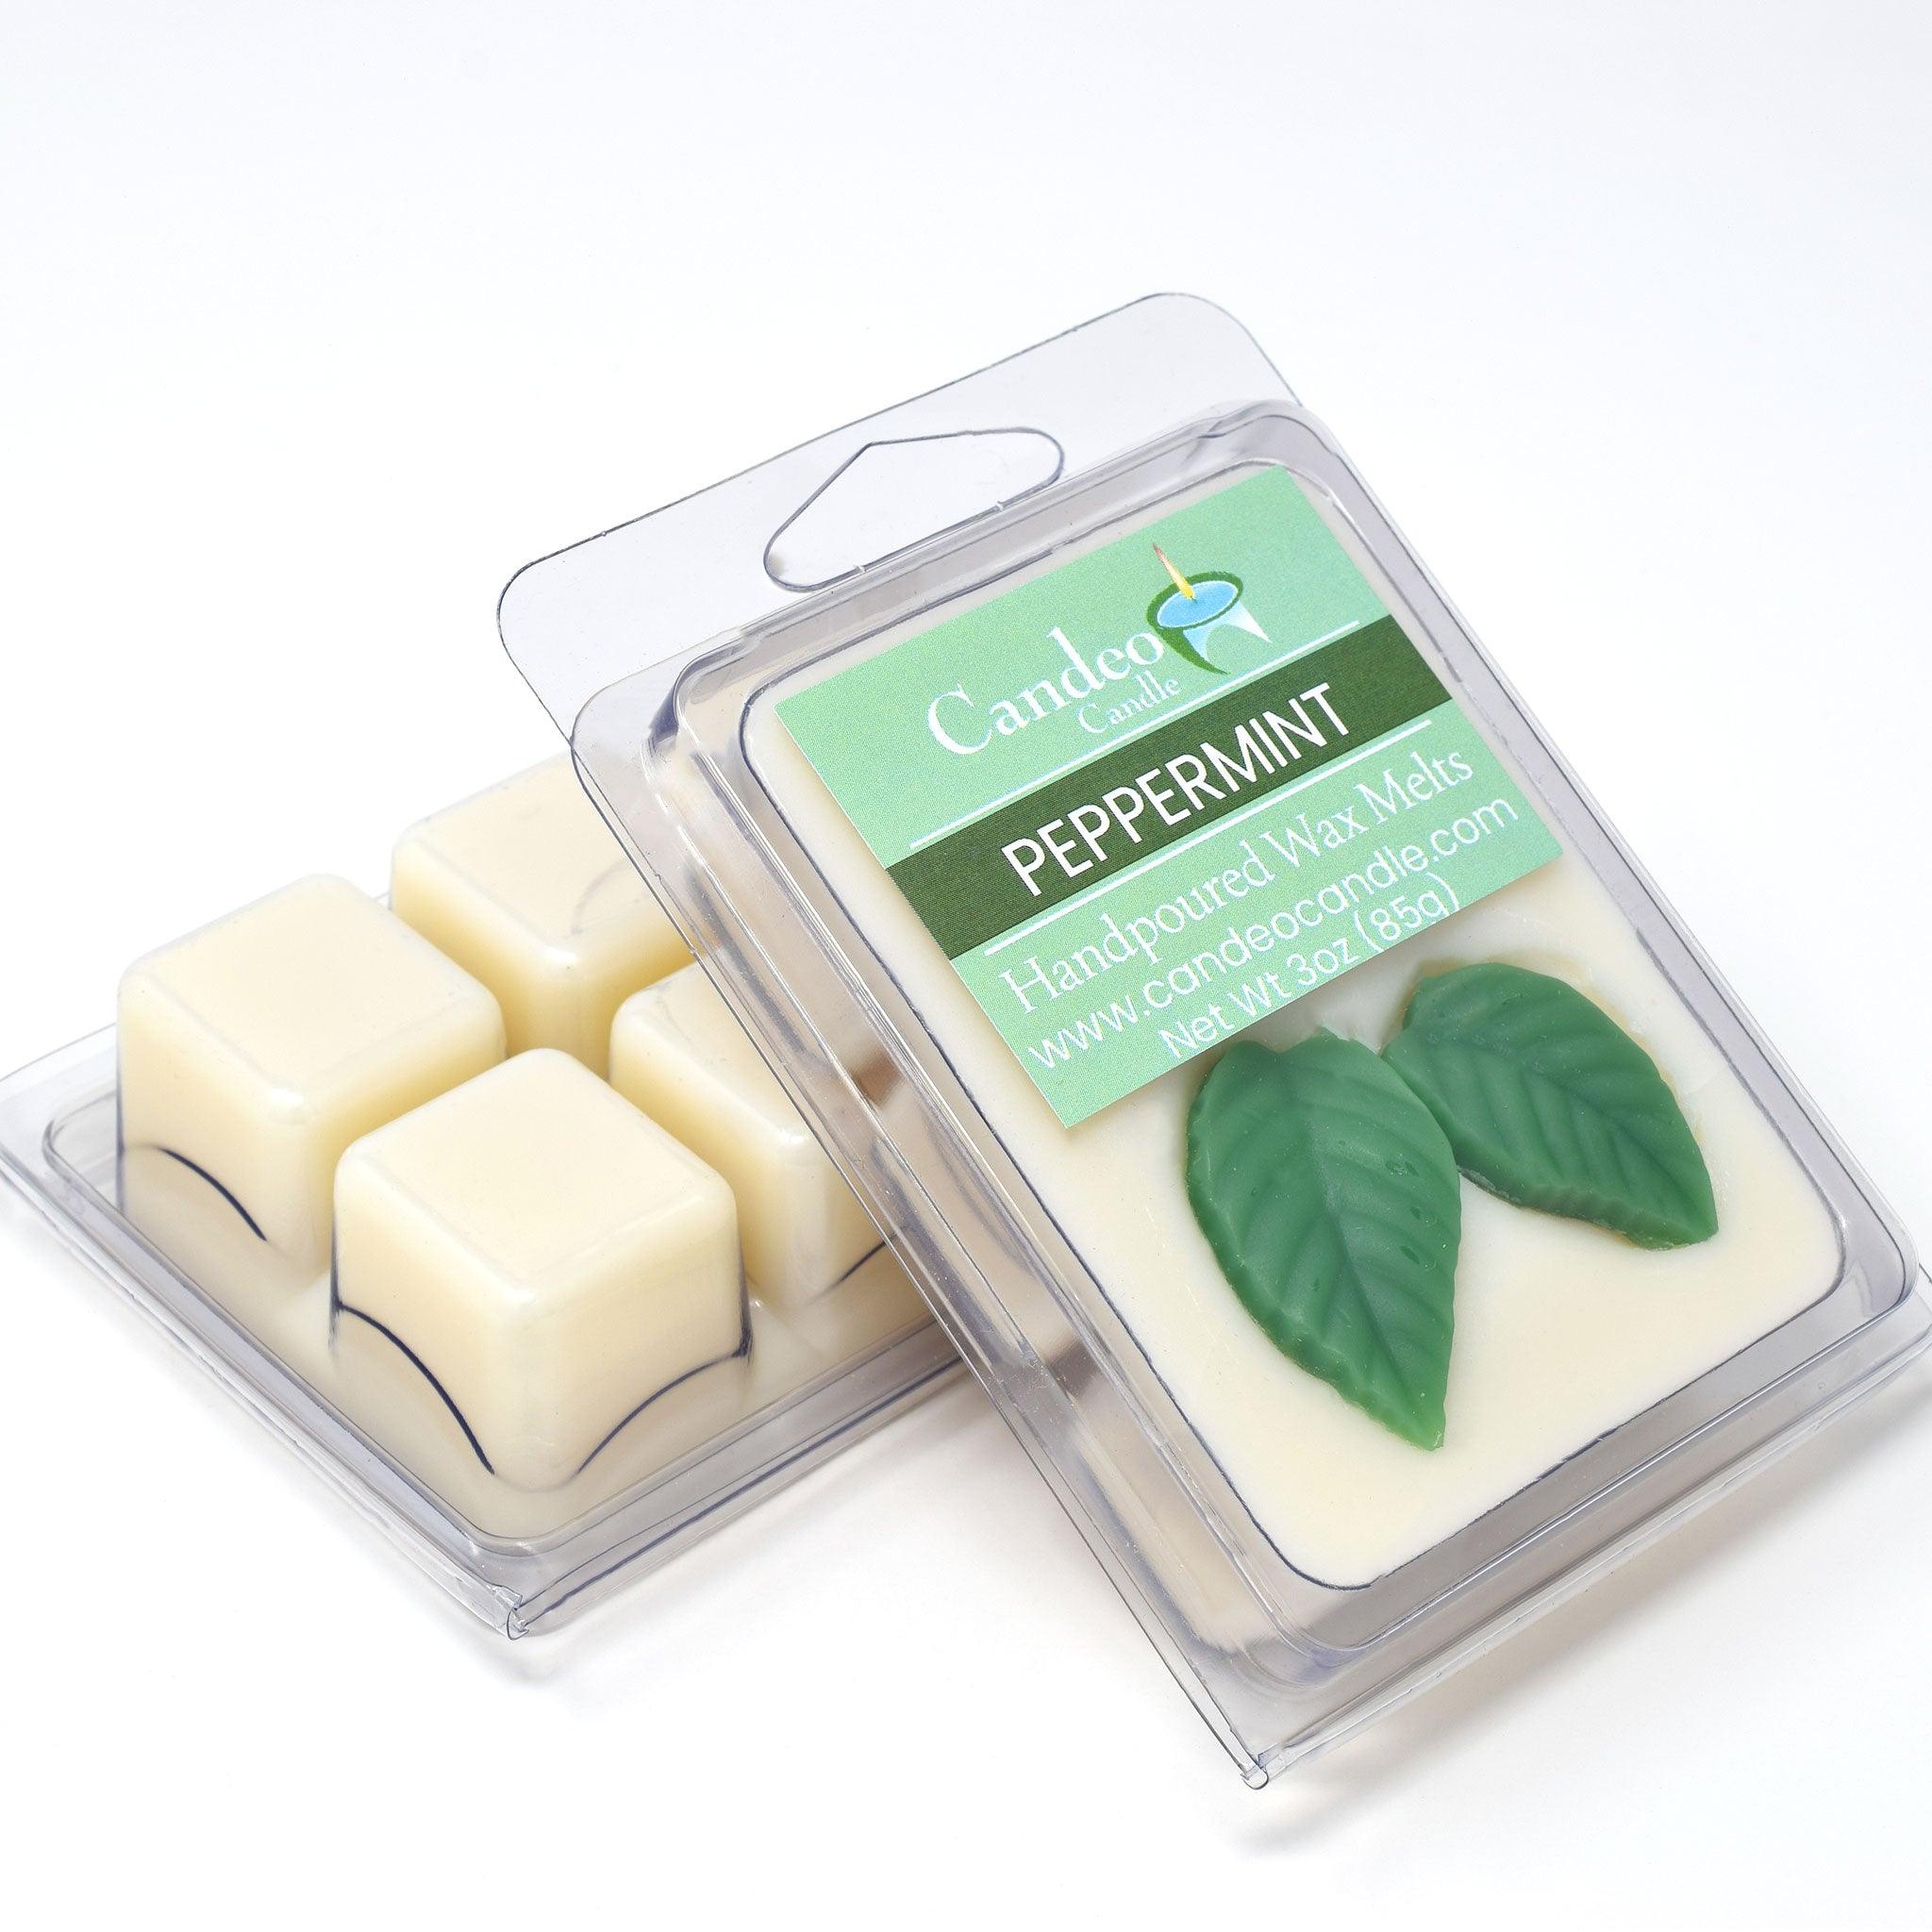 Peppermint Essential Oil, Lava Melts, Soy Melt Cubes, 2-Pack - Candeo Candle